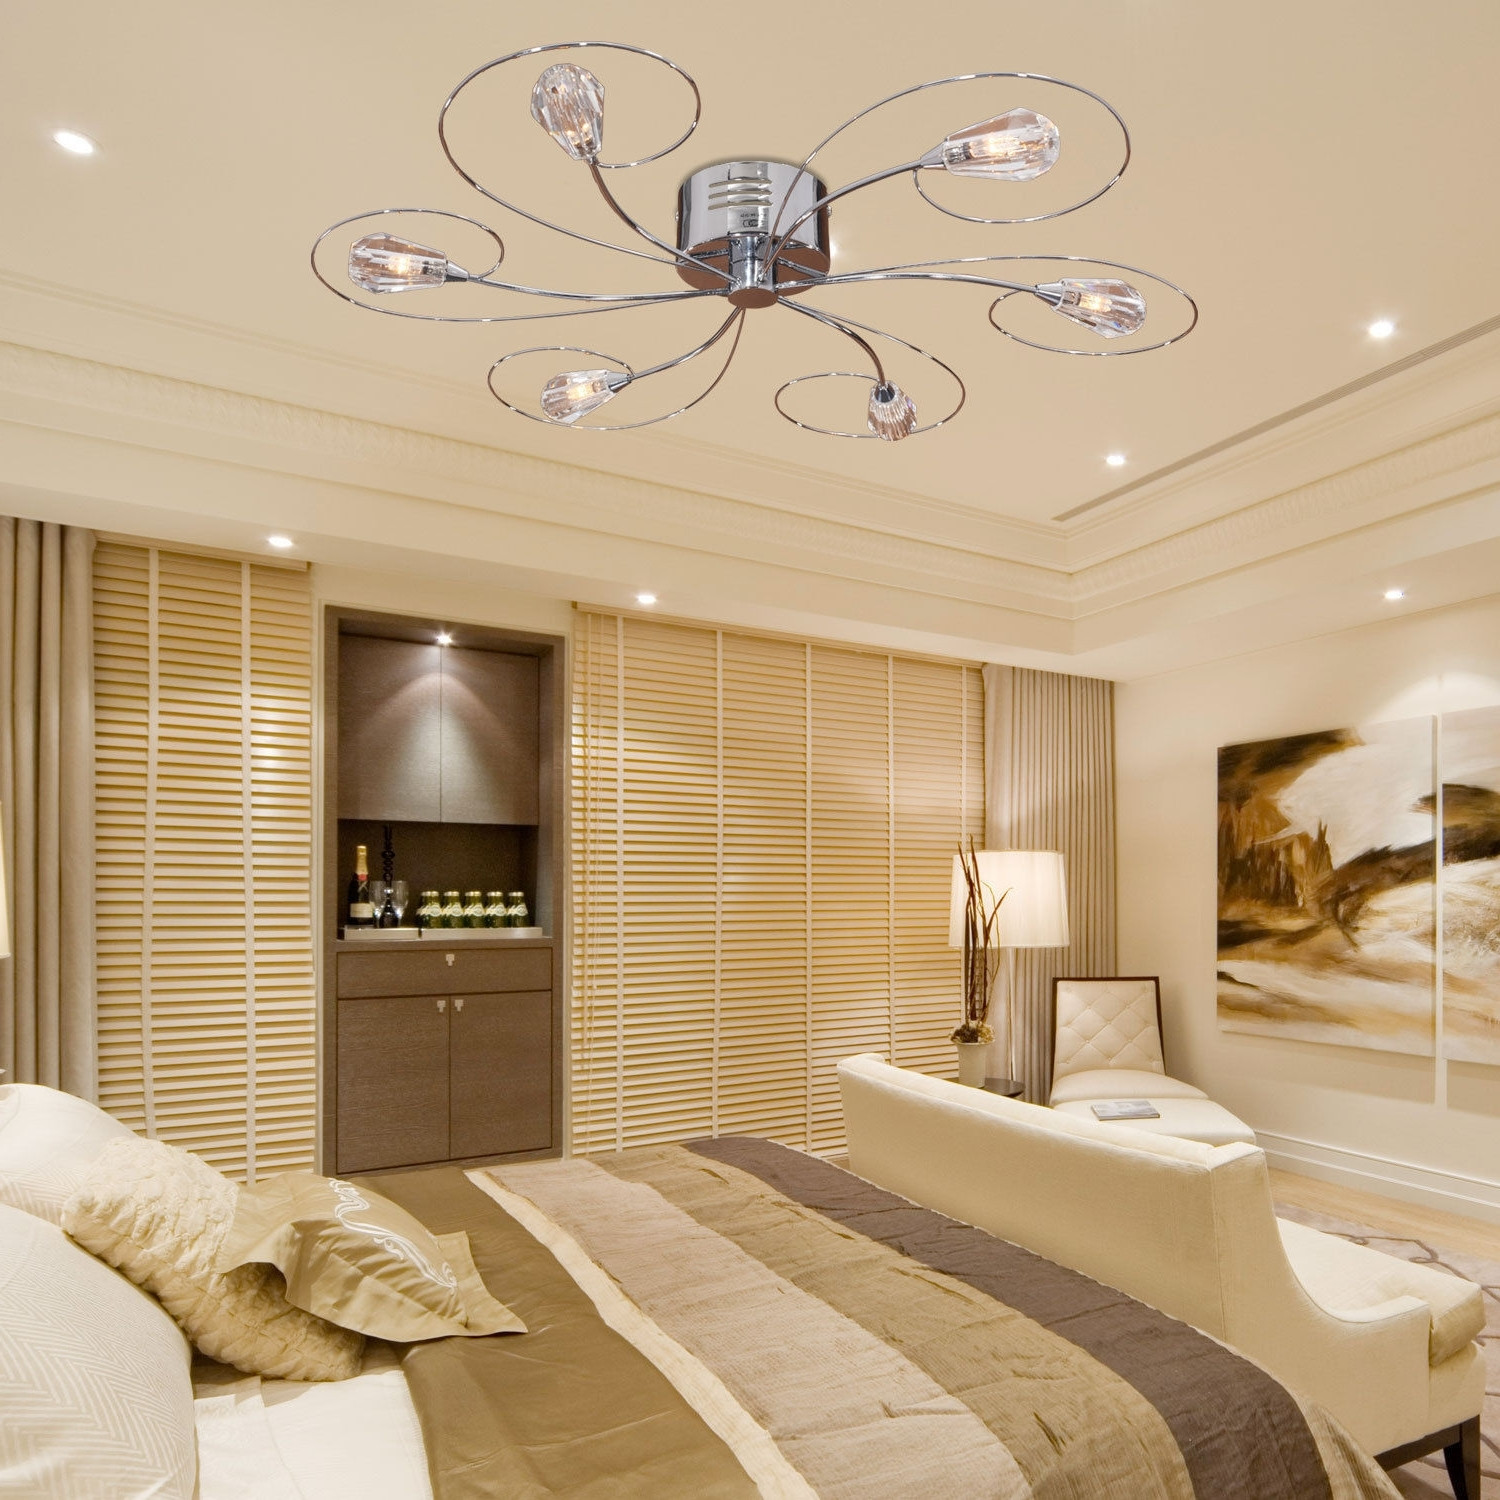 Bedroom Fan Lights
 Cool Ceiling Fans With Lights pixball